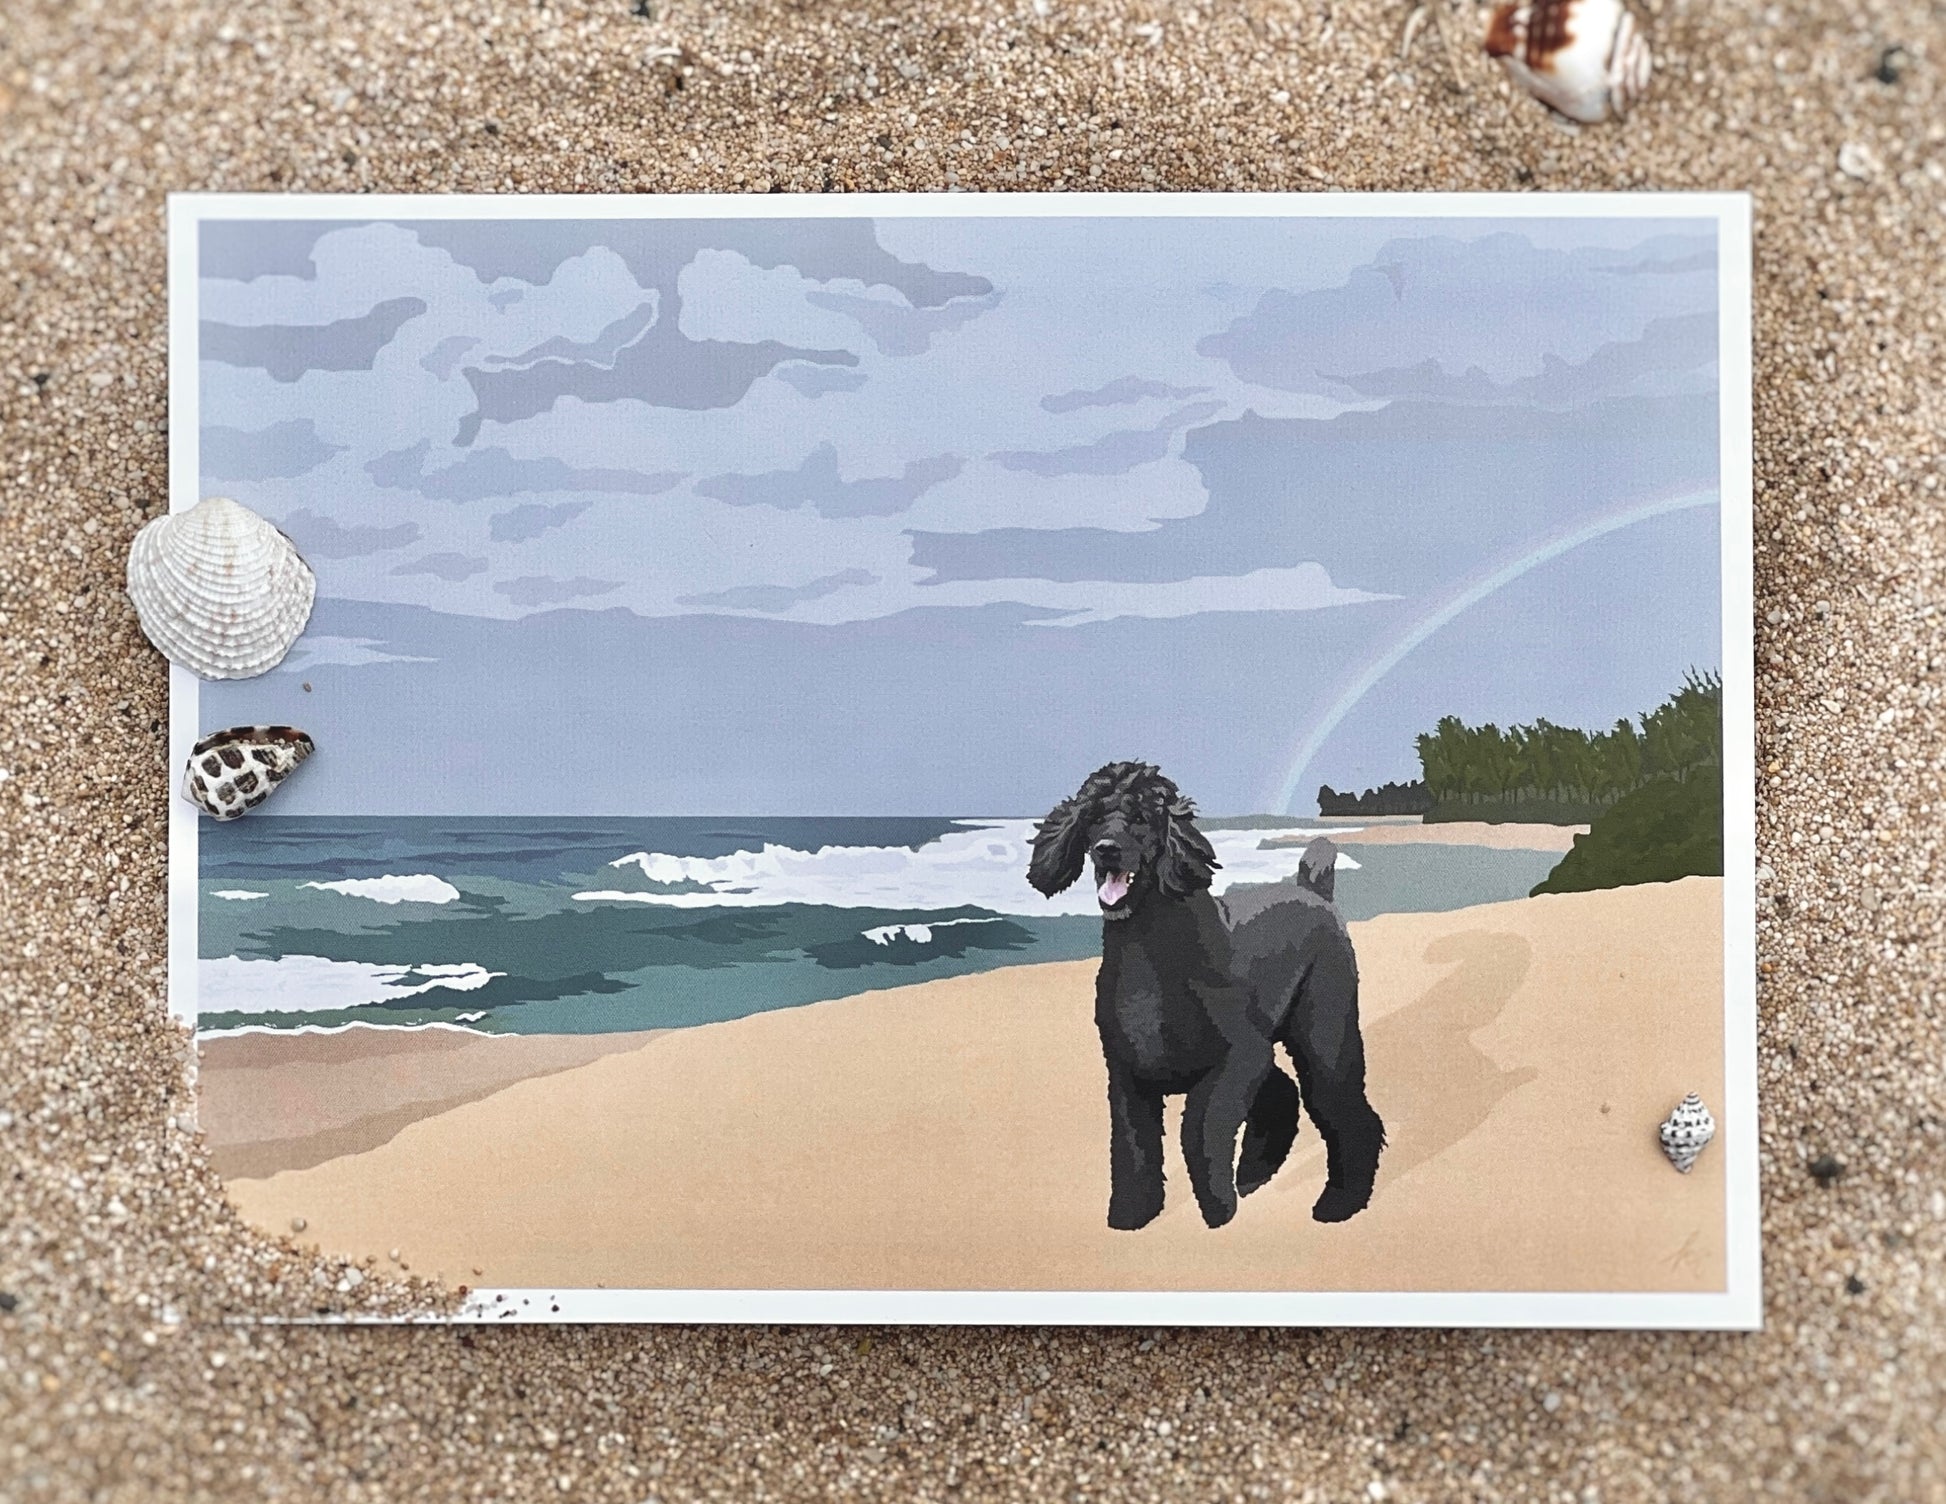 5"x7" color print of Poodle at Sunset Beach